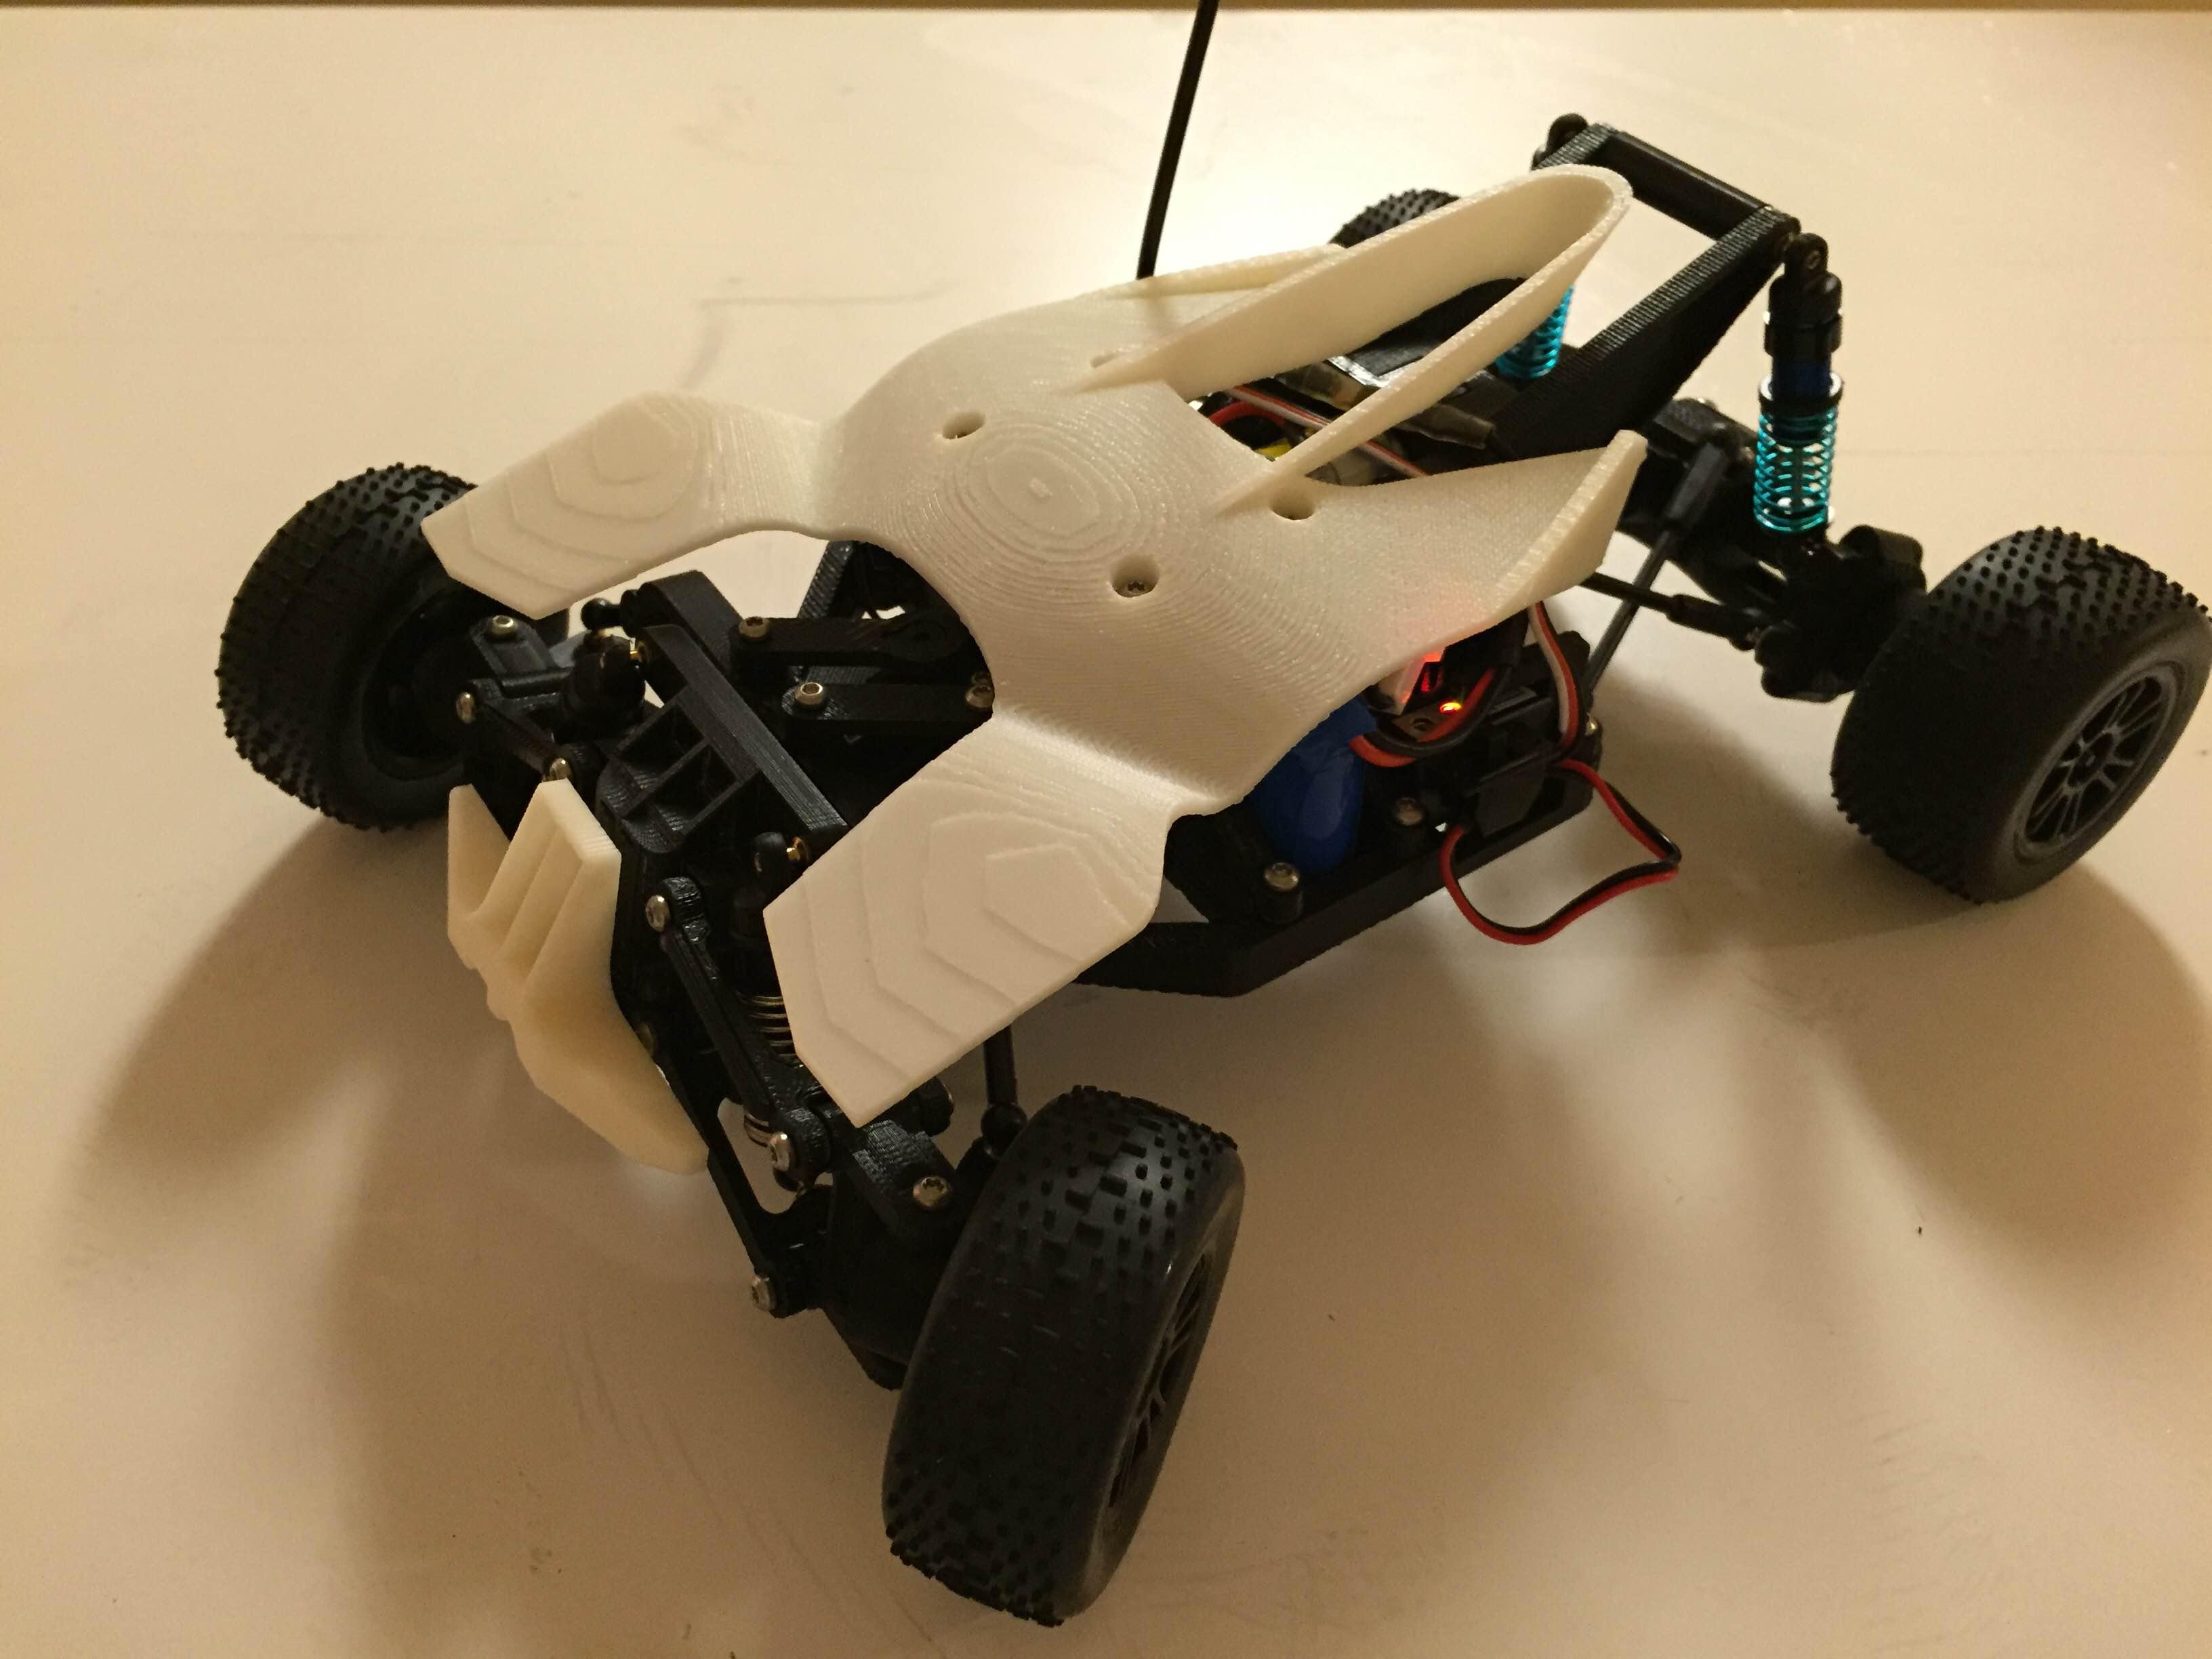 OffRoad or In Class 3D Printed RC Vehicle Gets Top Marks